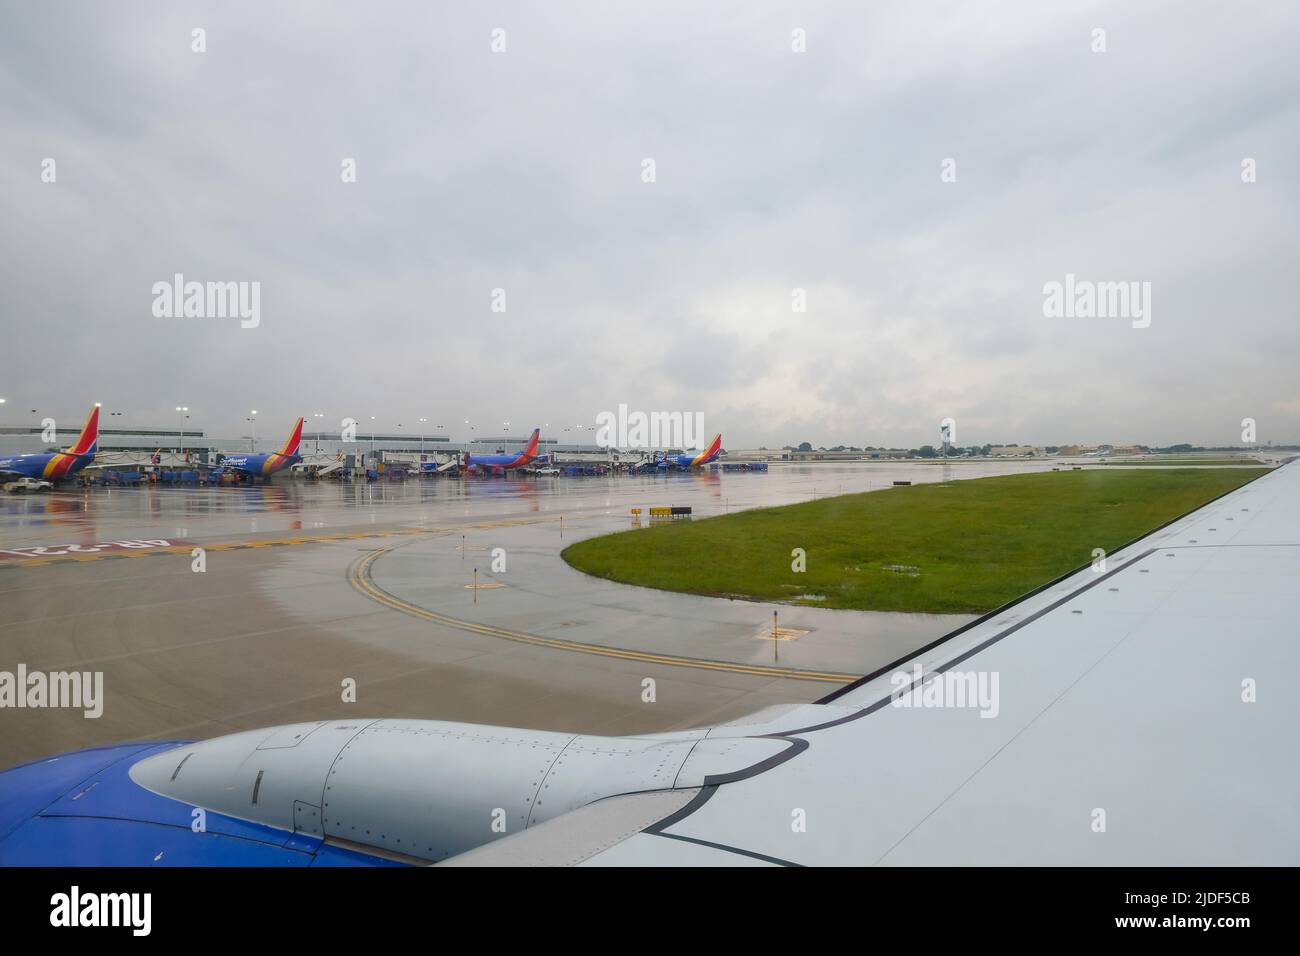 Stock images of South West Airlines airplanes lined up at gate taken from plane window Stock Photo